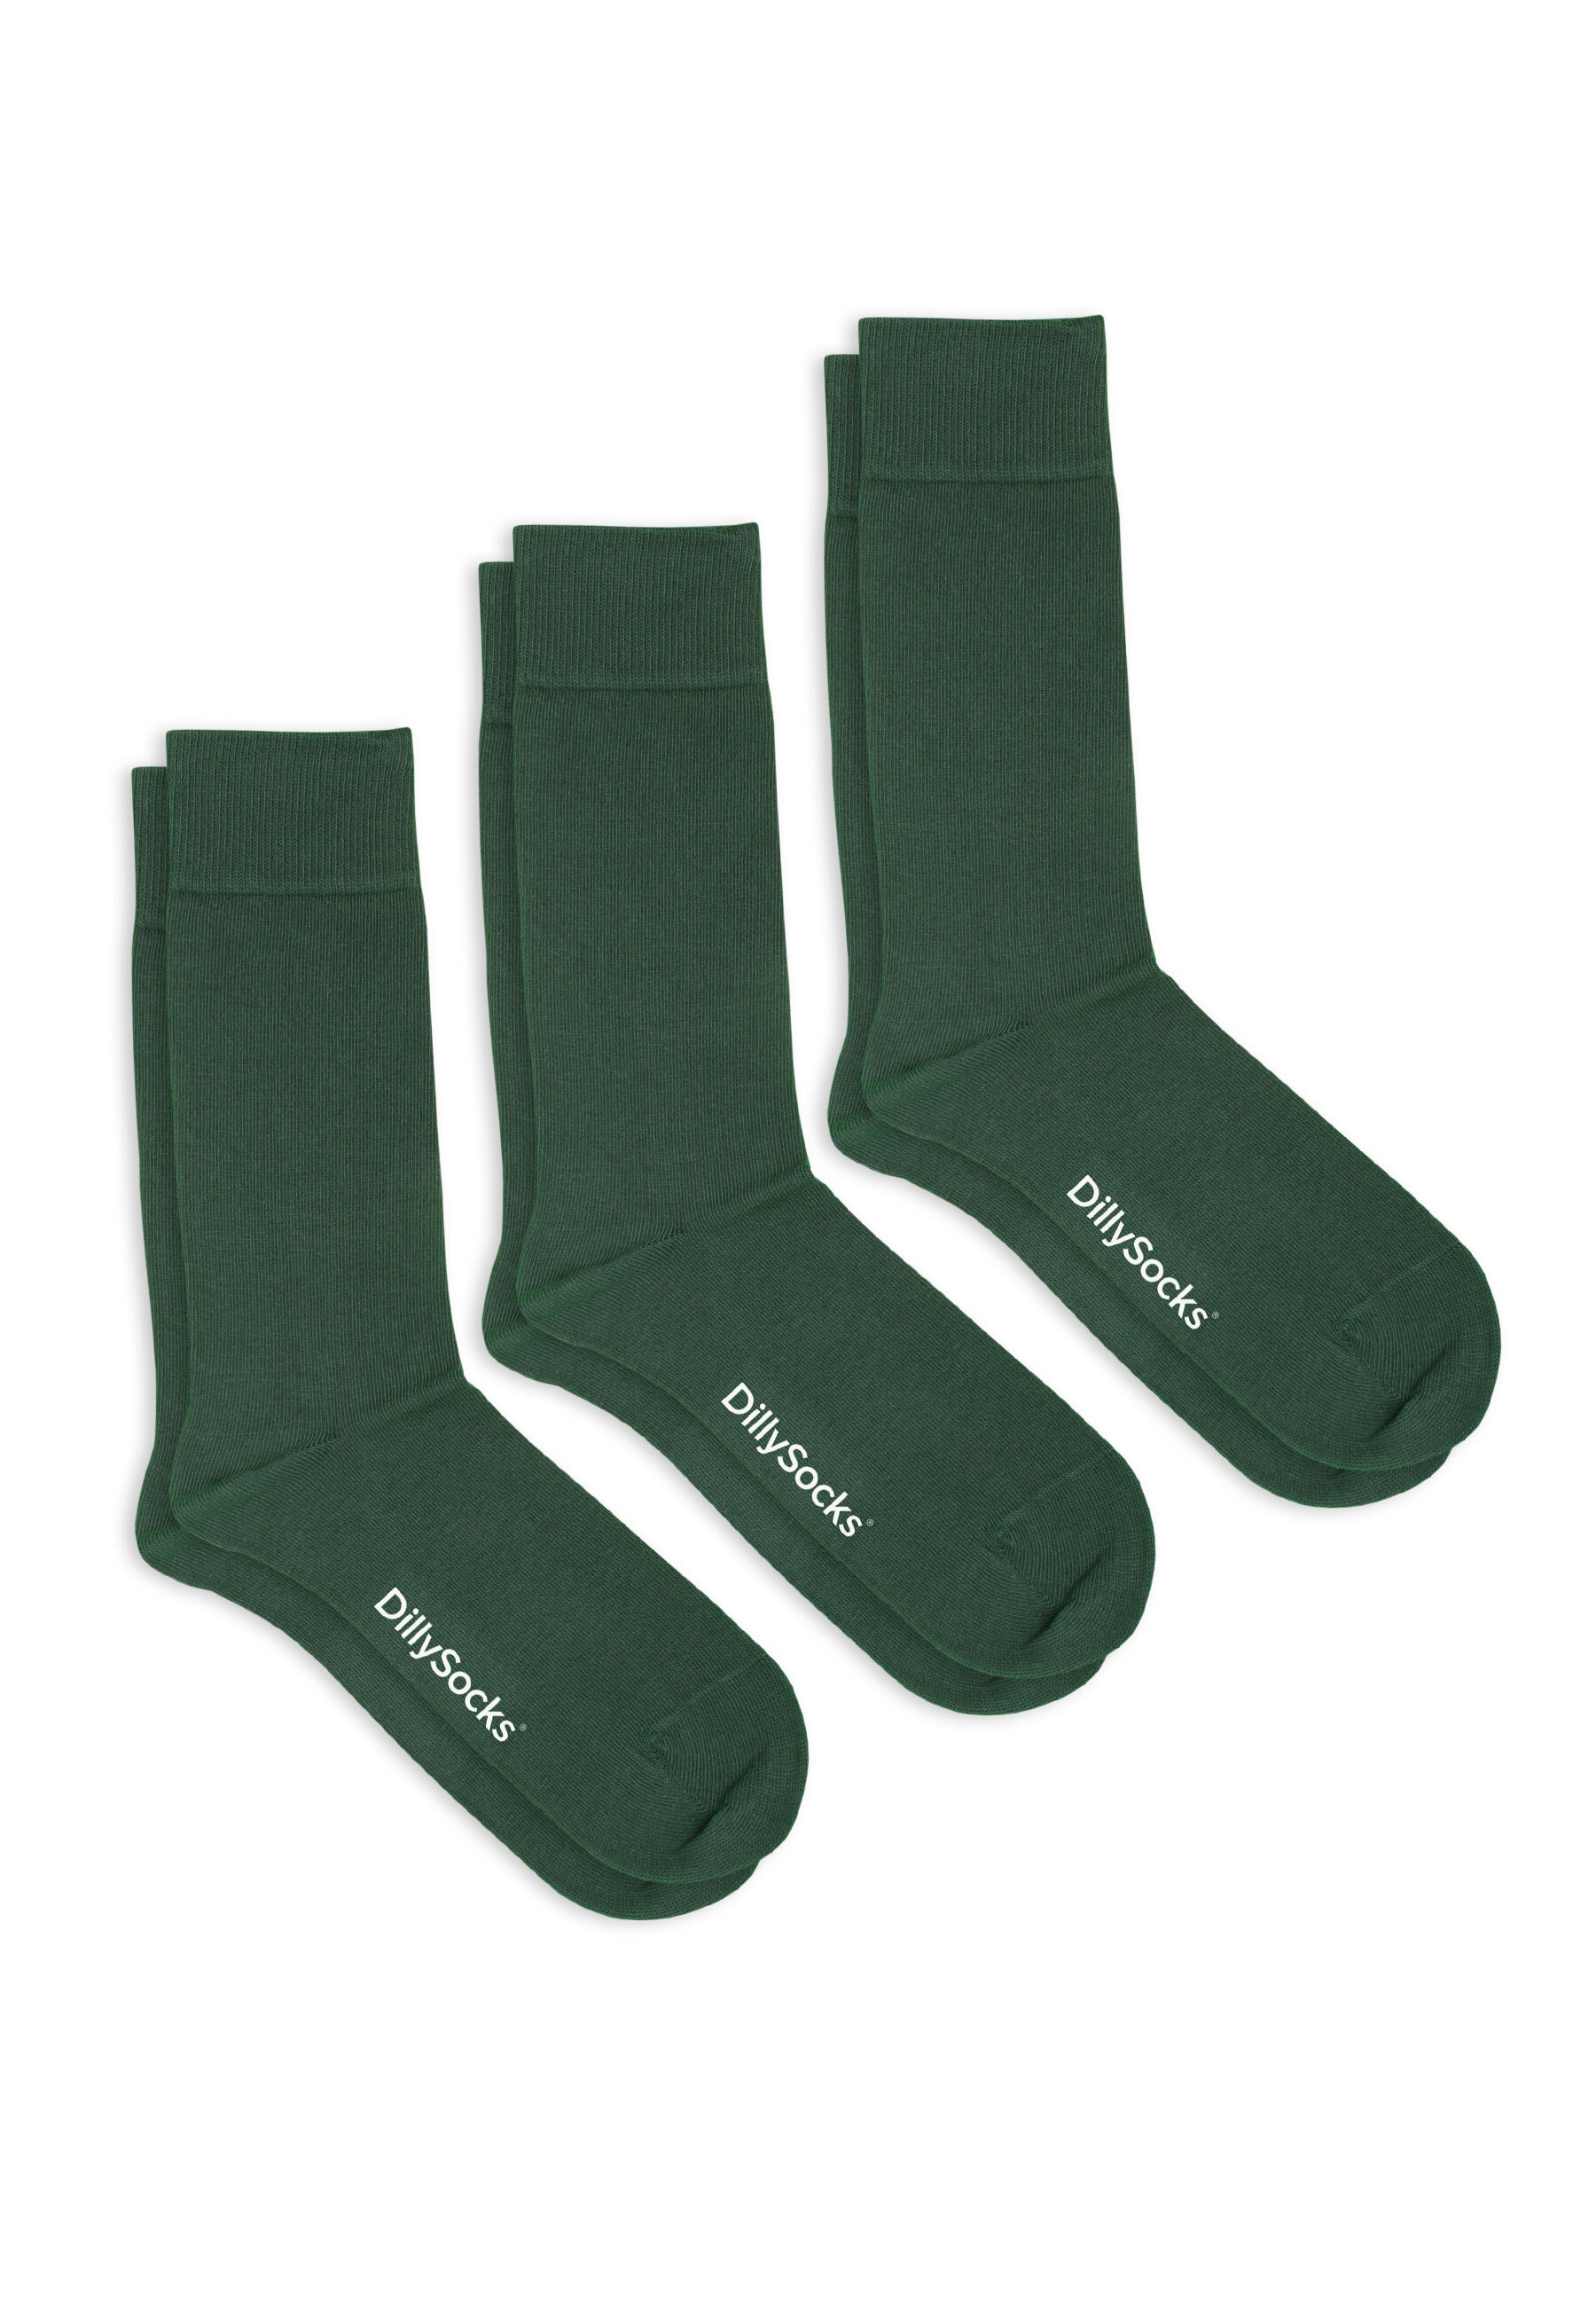 Носки DillySocks 3er Set One Color Smooth, цвет Smooth Forest Green